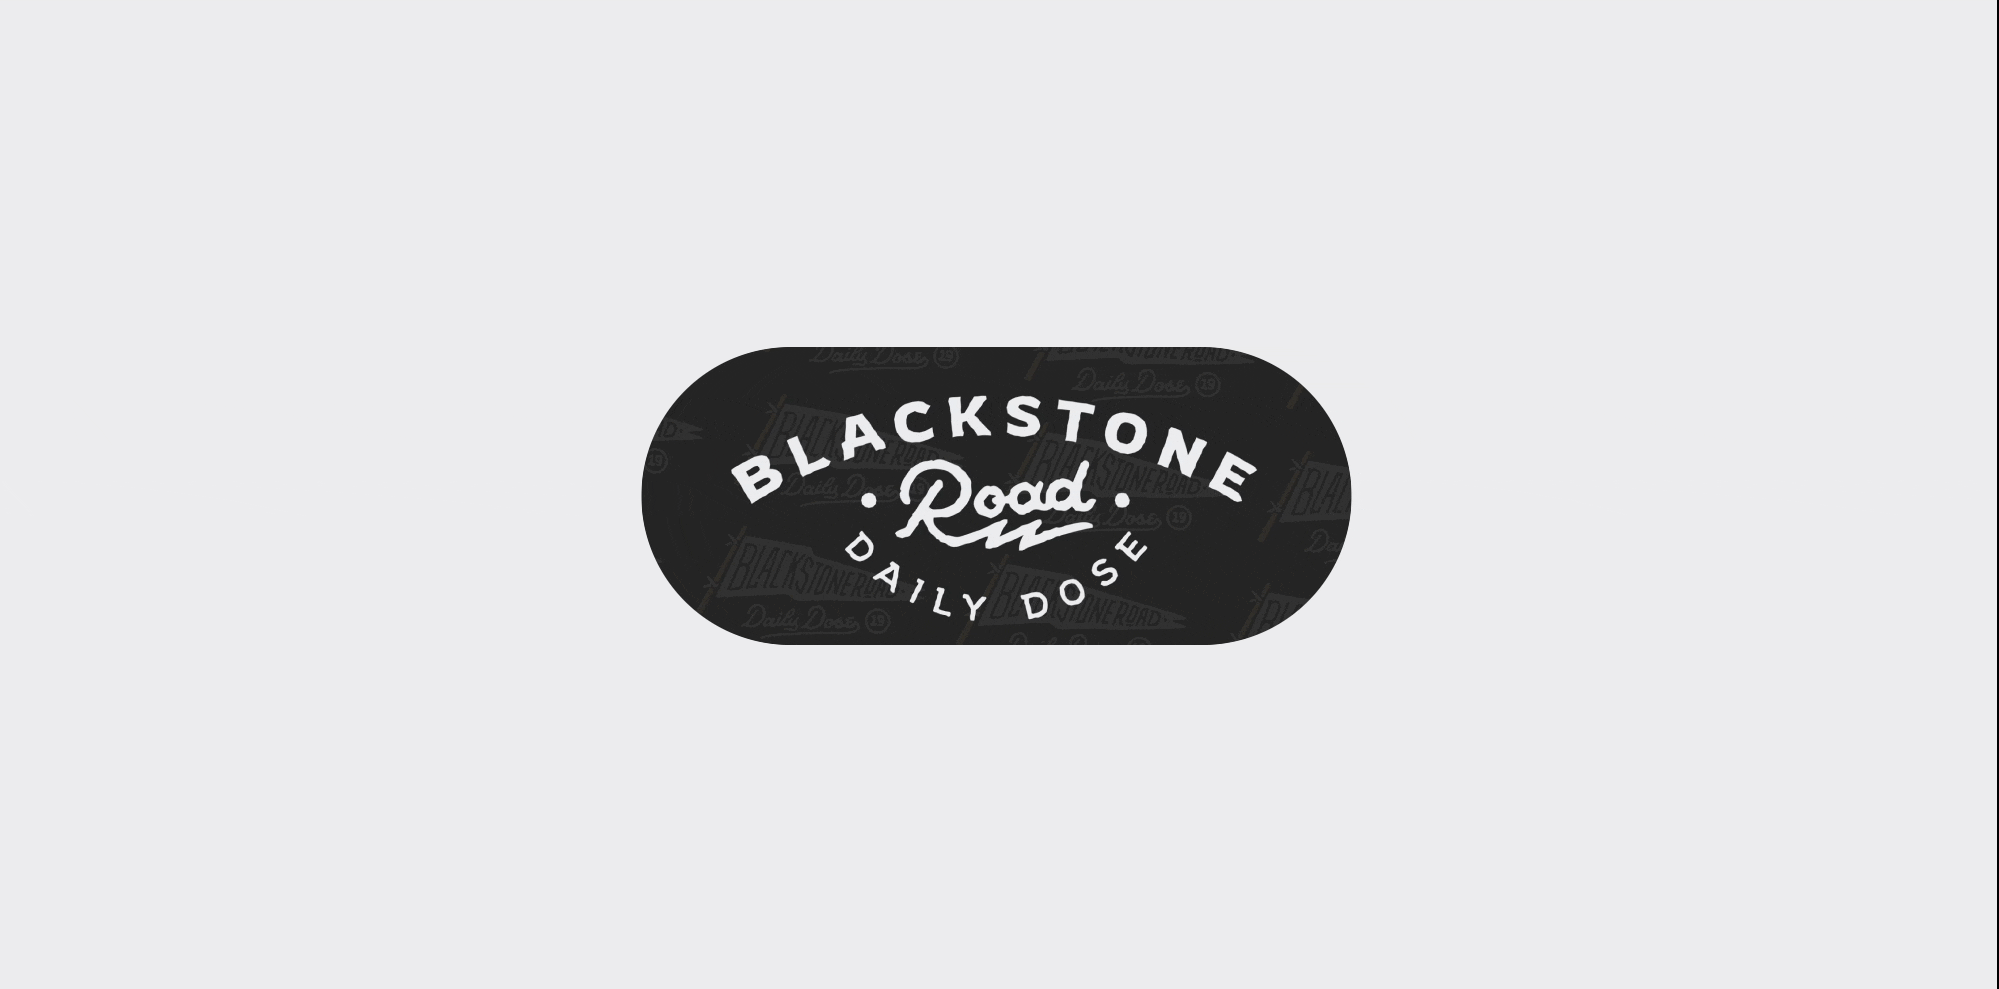 A GIF that begins with the Blackstone Road logo and then scrolls down the brand's Shopify store homepage.